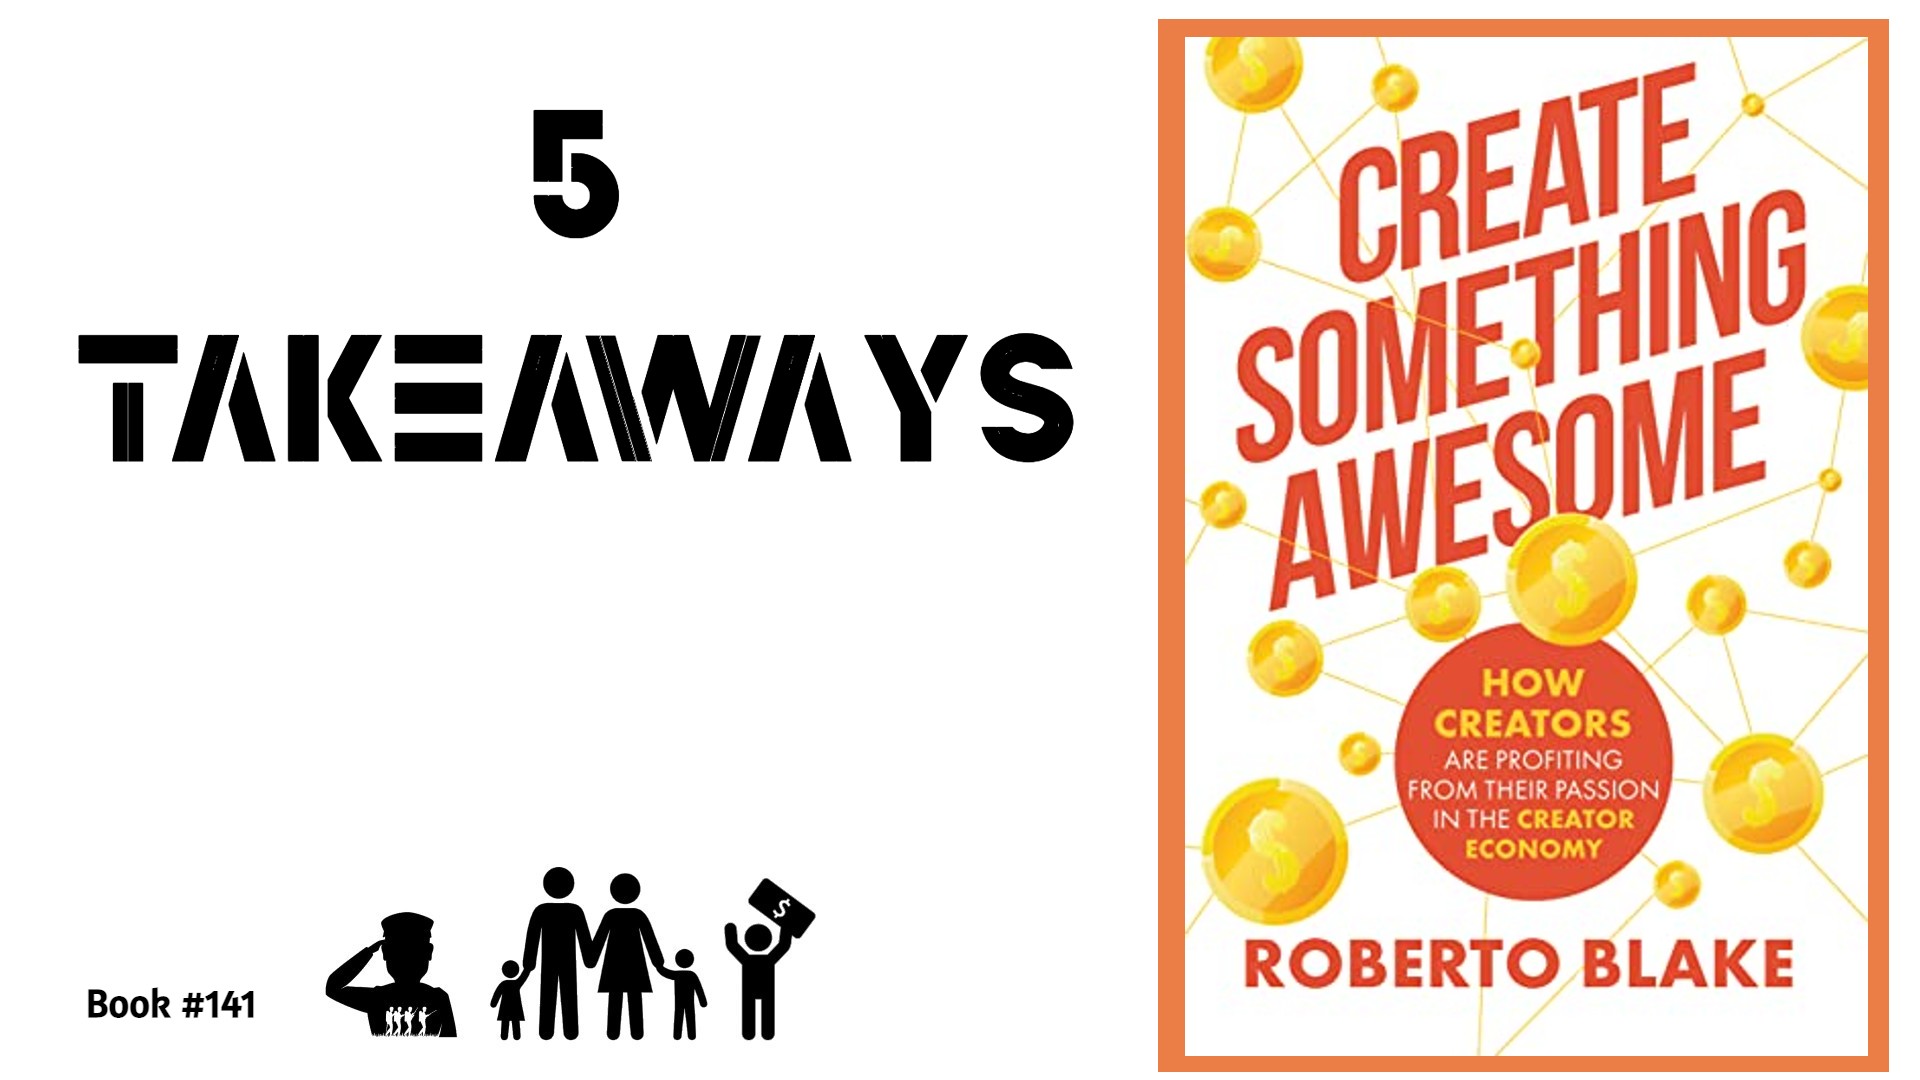 5 Takeaways from “Create Something Awesome”